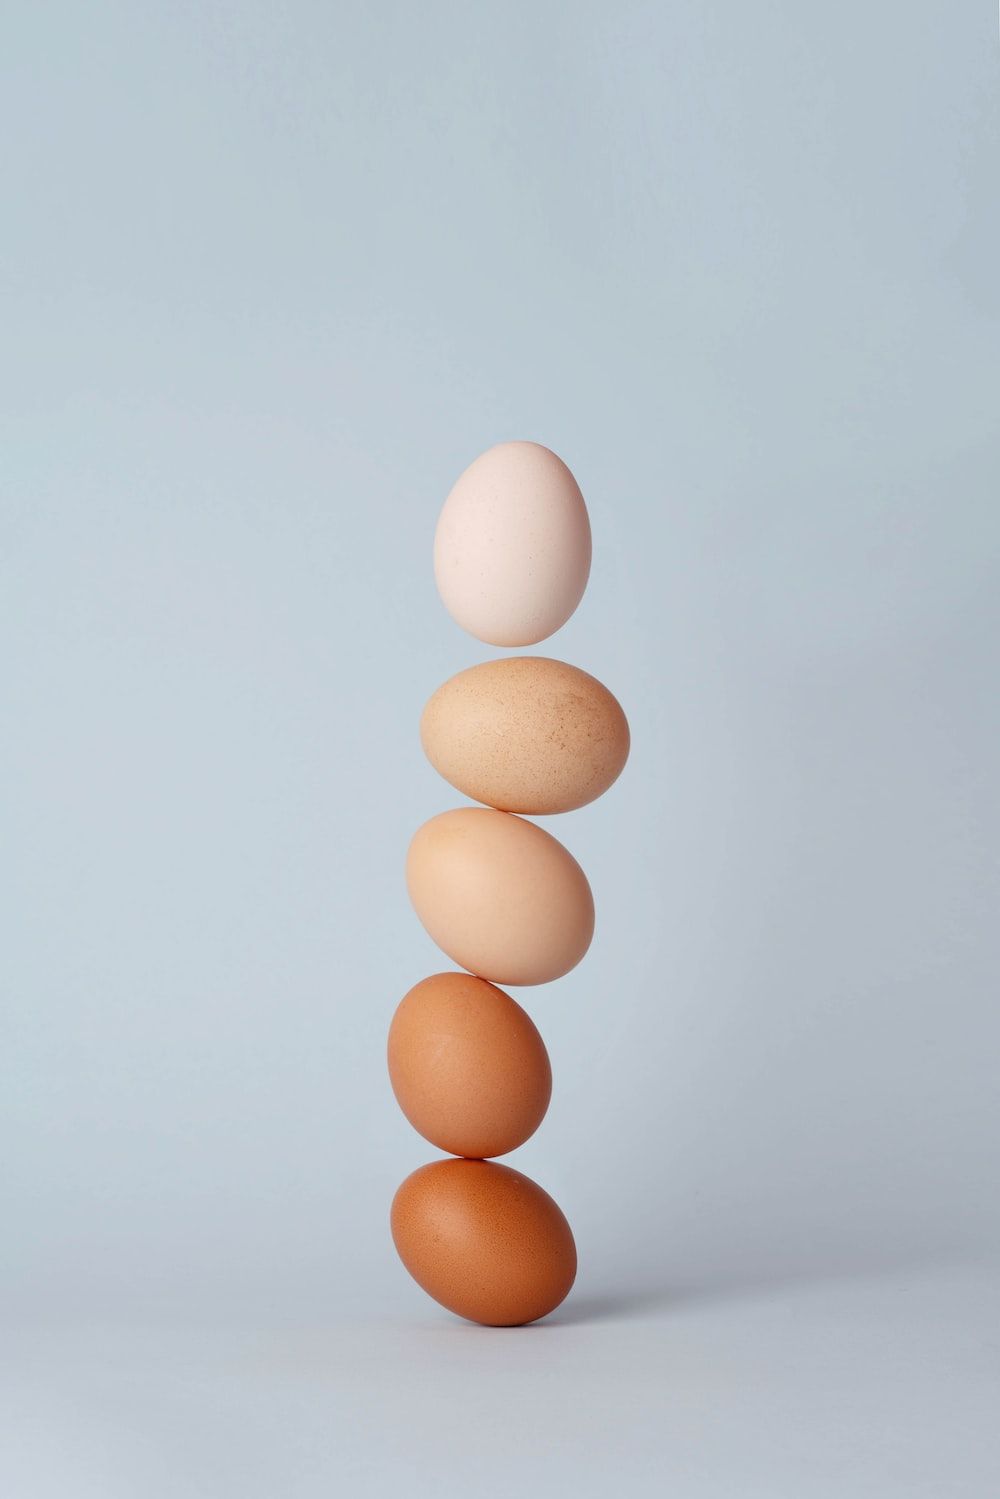 A stack of eggs on top each other - Egg